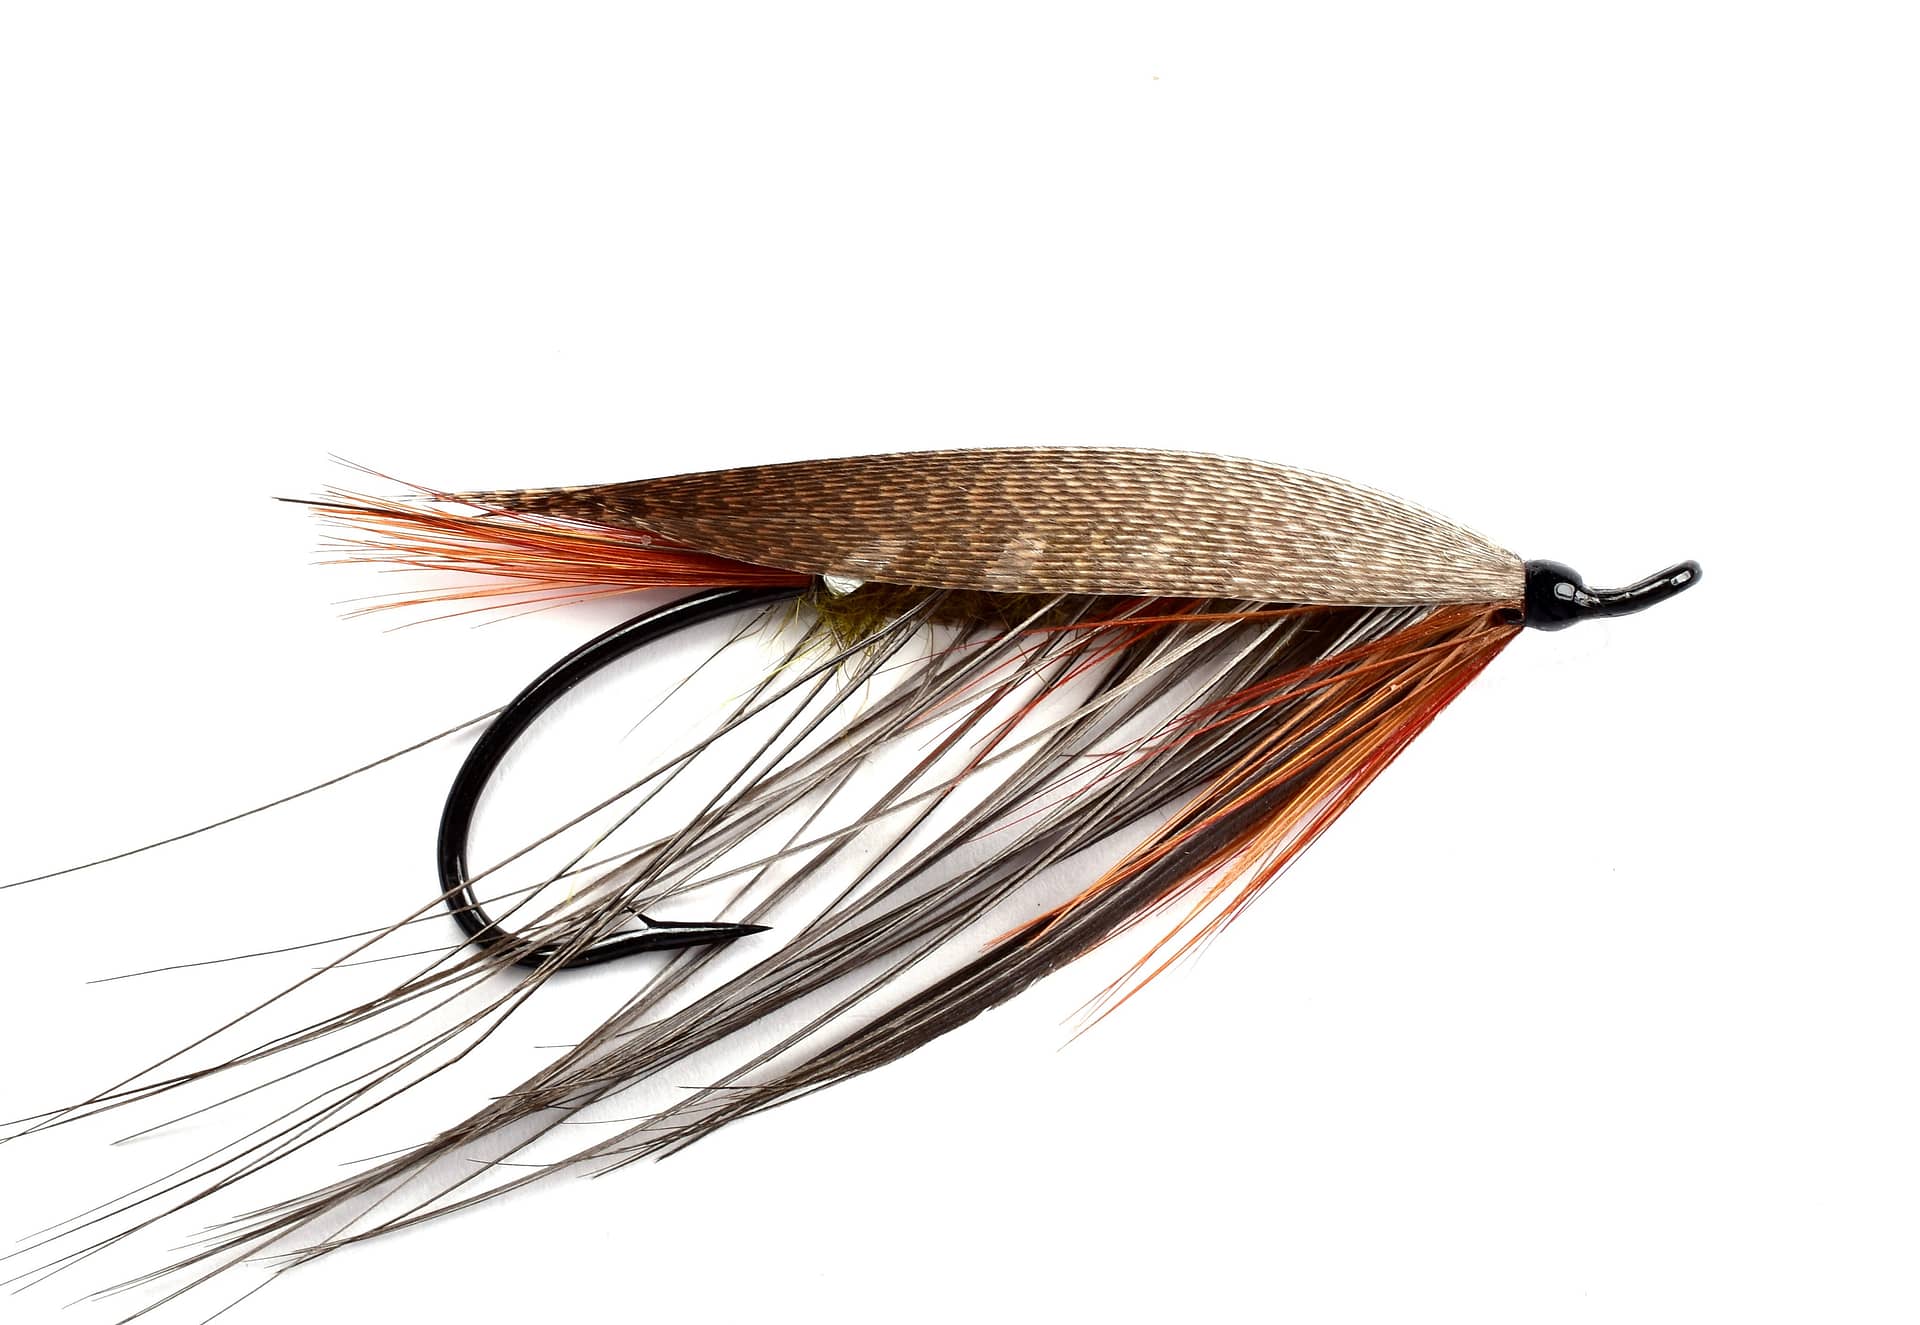 Fly tying Heron Feathers For Spey Flies